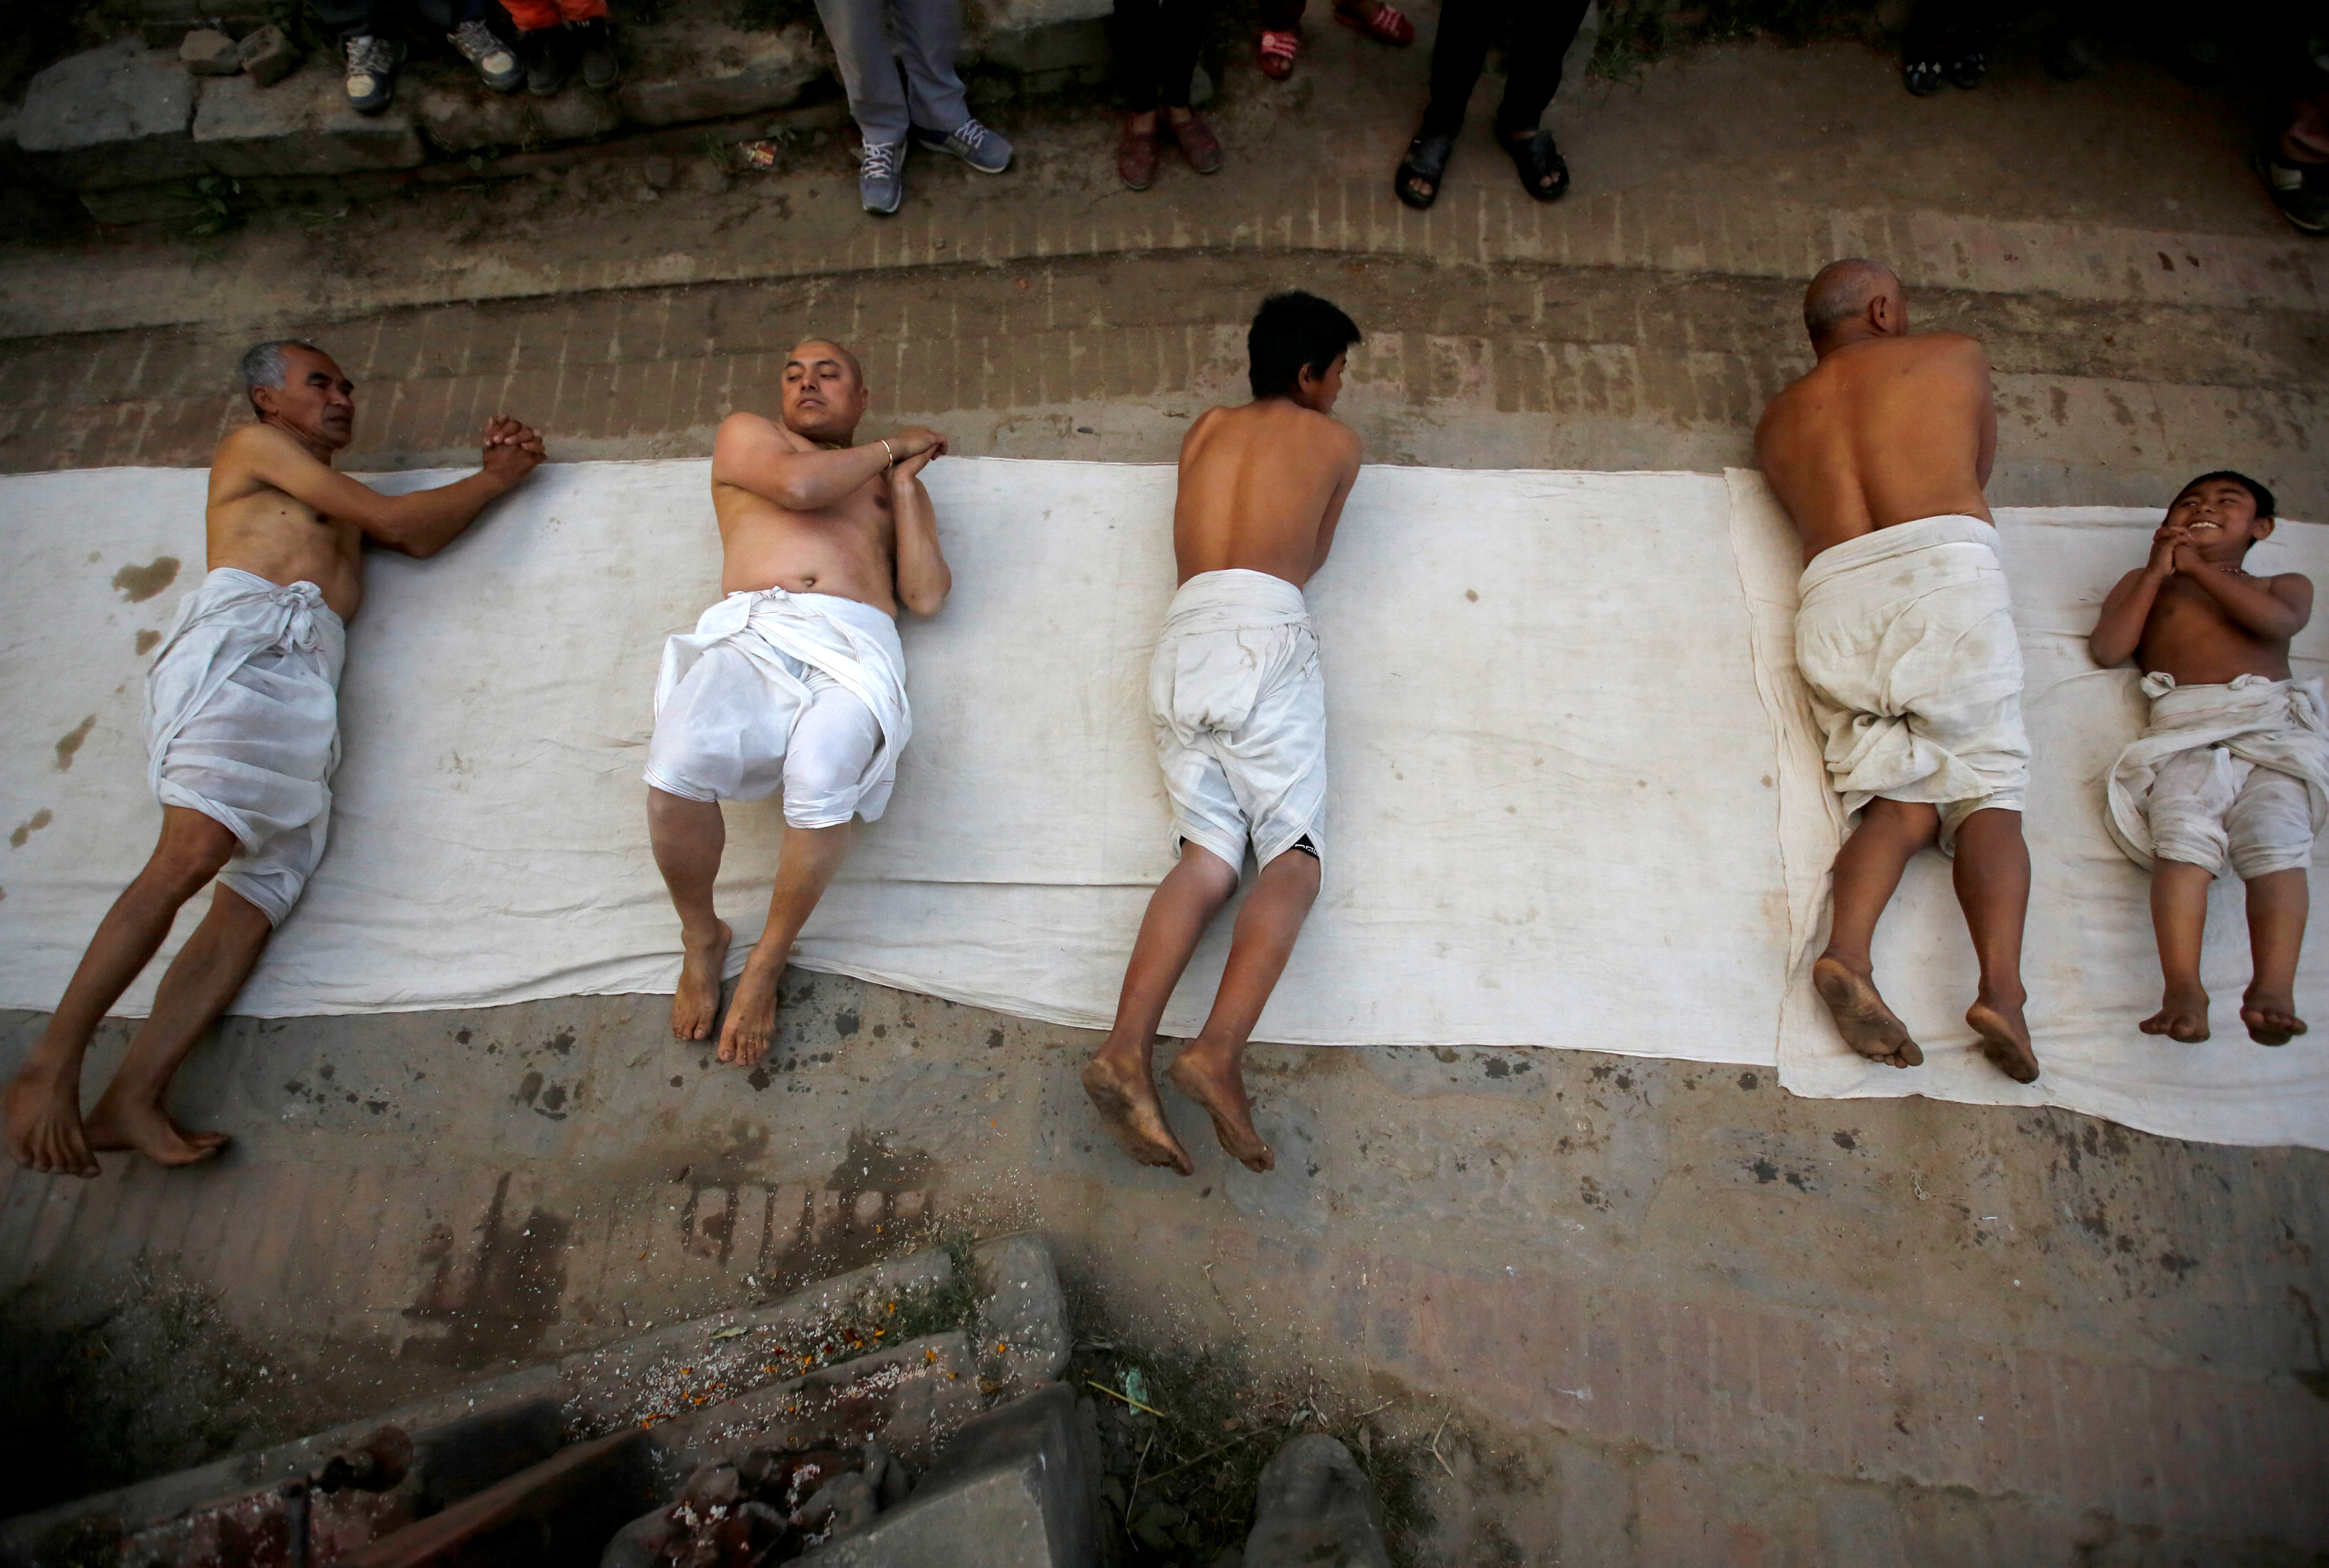 Devotees offer prayers by rolling on the street during the Swasthani Brata Katha festival in Bhaktapur, Nepal January 13, 2017. REUTERS/Navesh Chitrakar